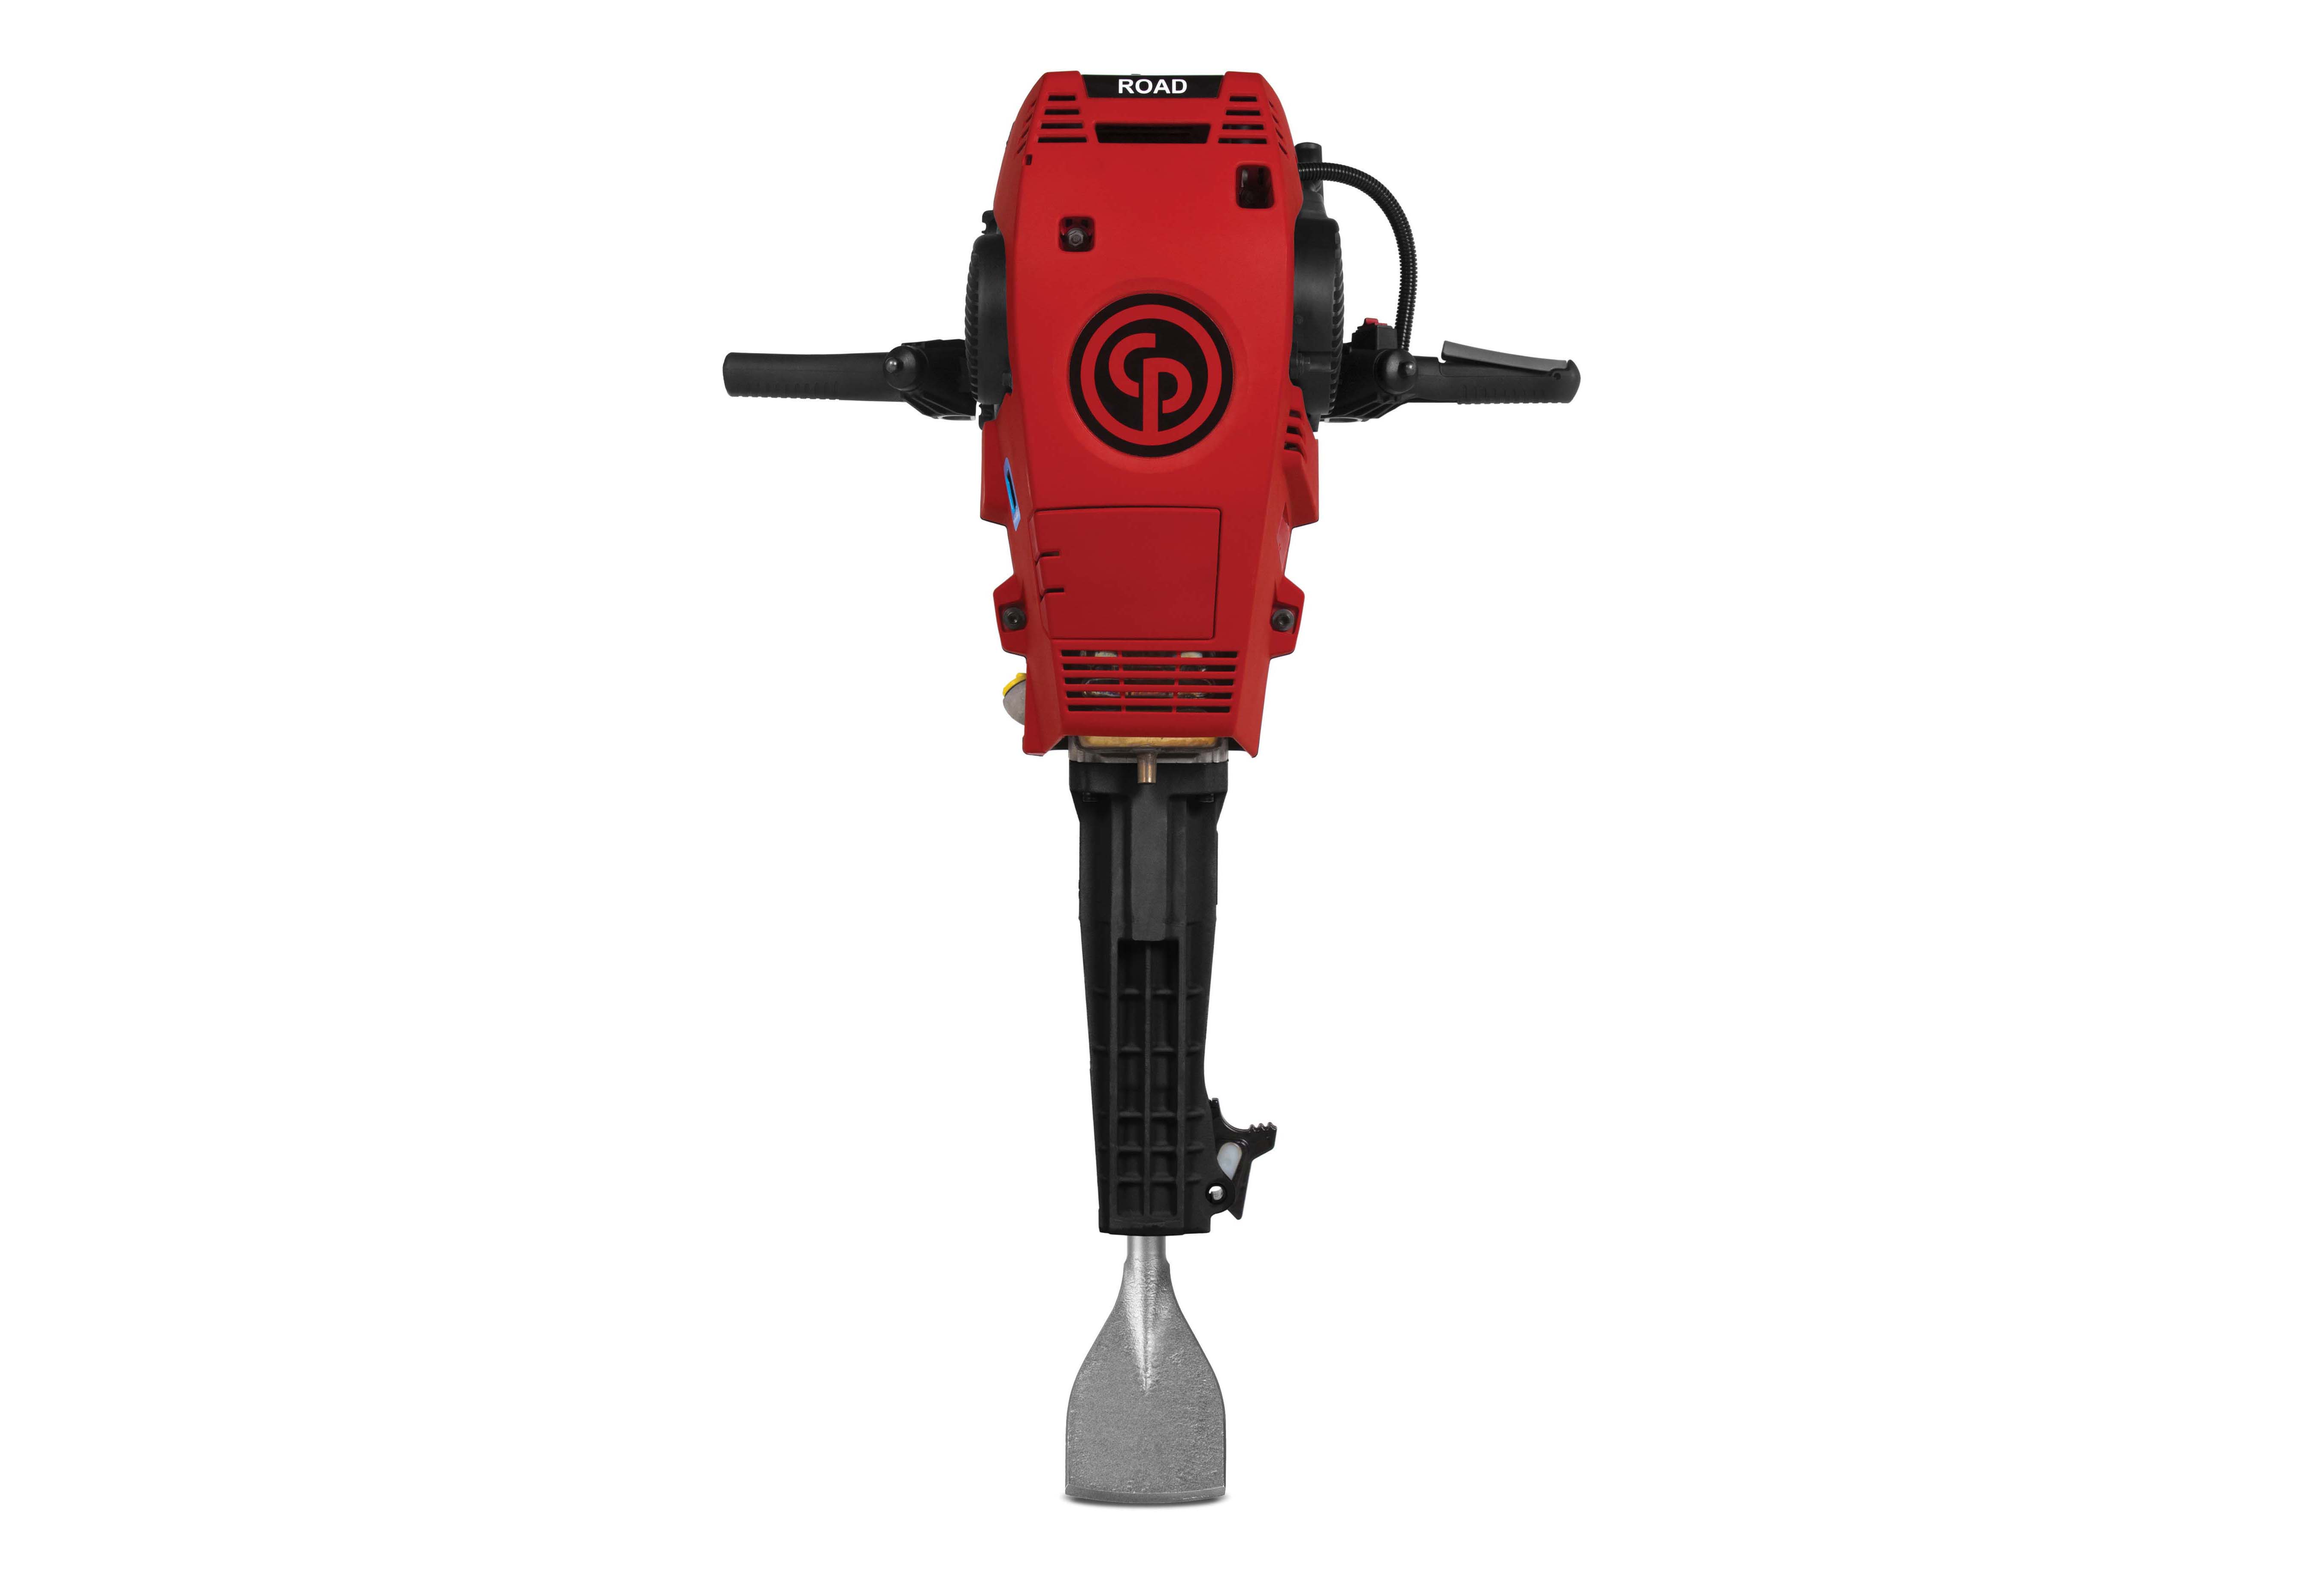 Chicago Pneumatic Red Hawk road drill 